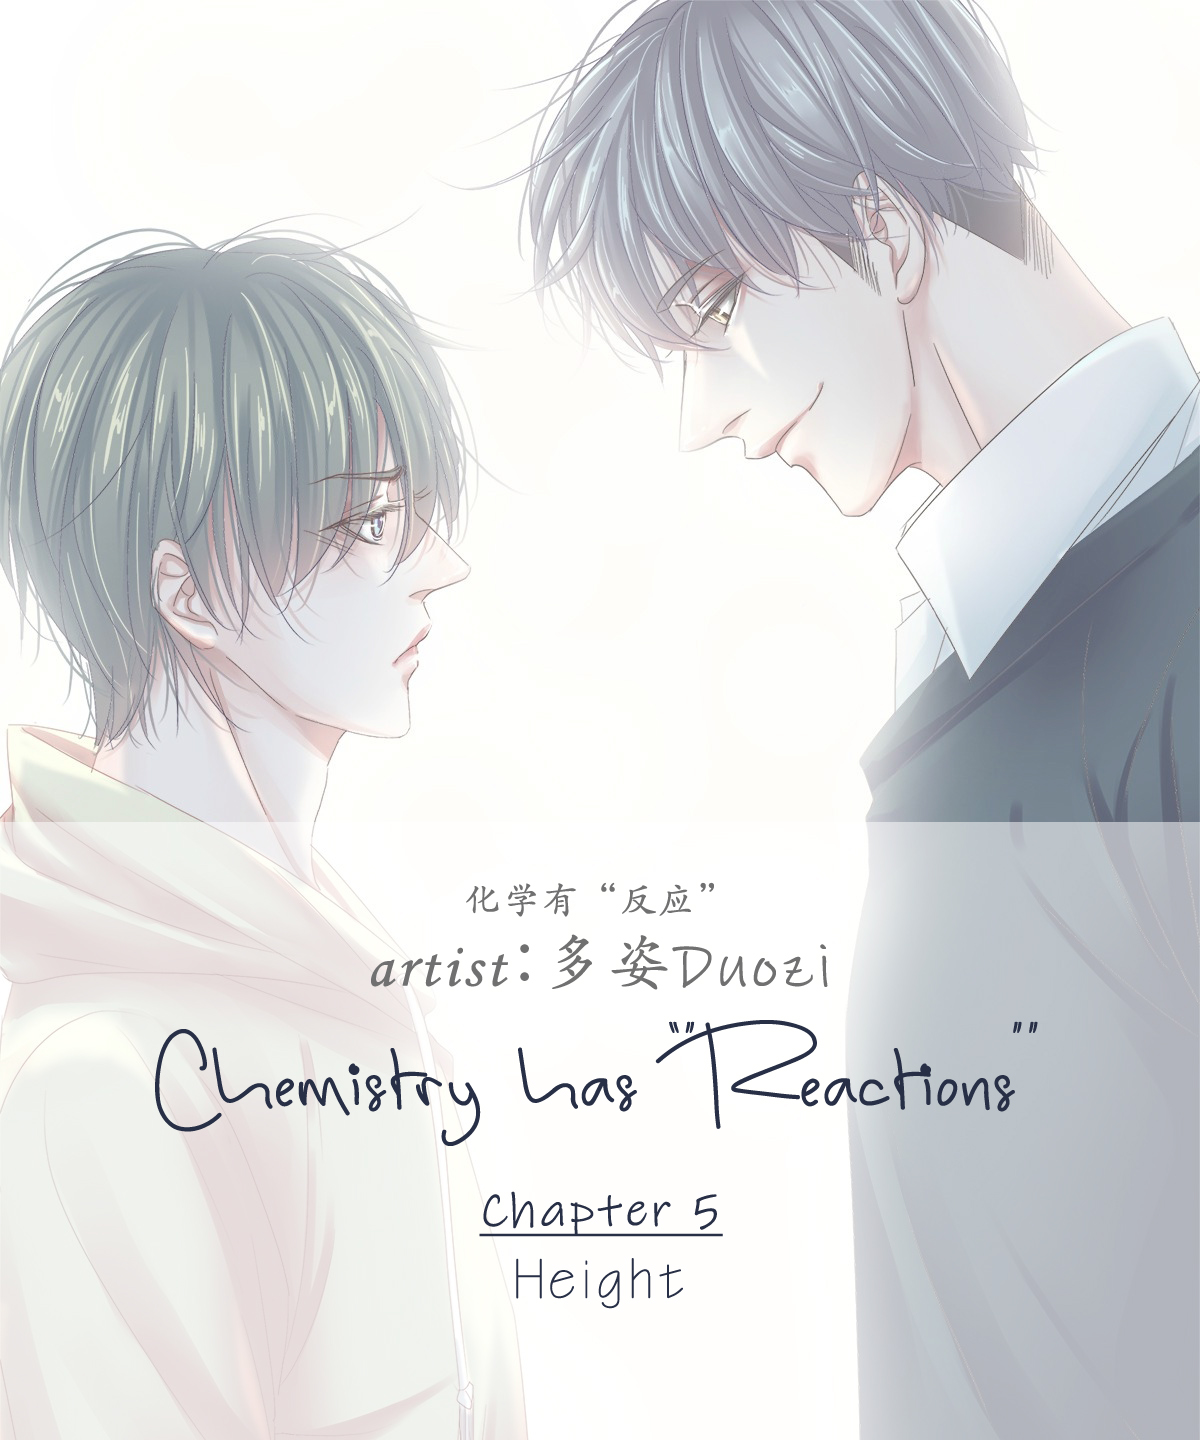 Chemistry has "Reactions" Vol. 1 Ch. 5